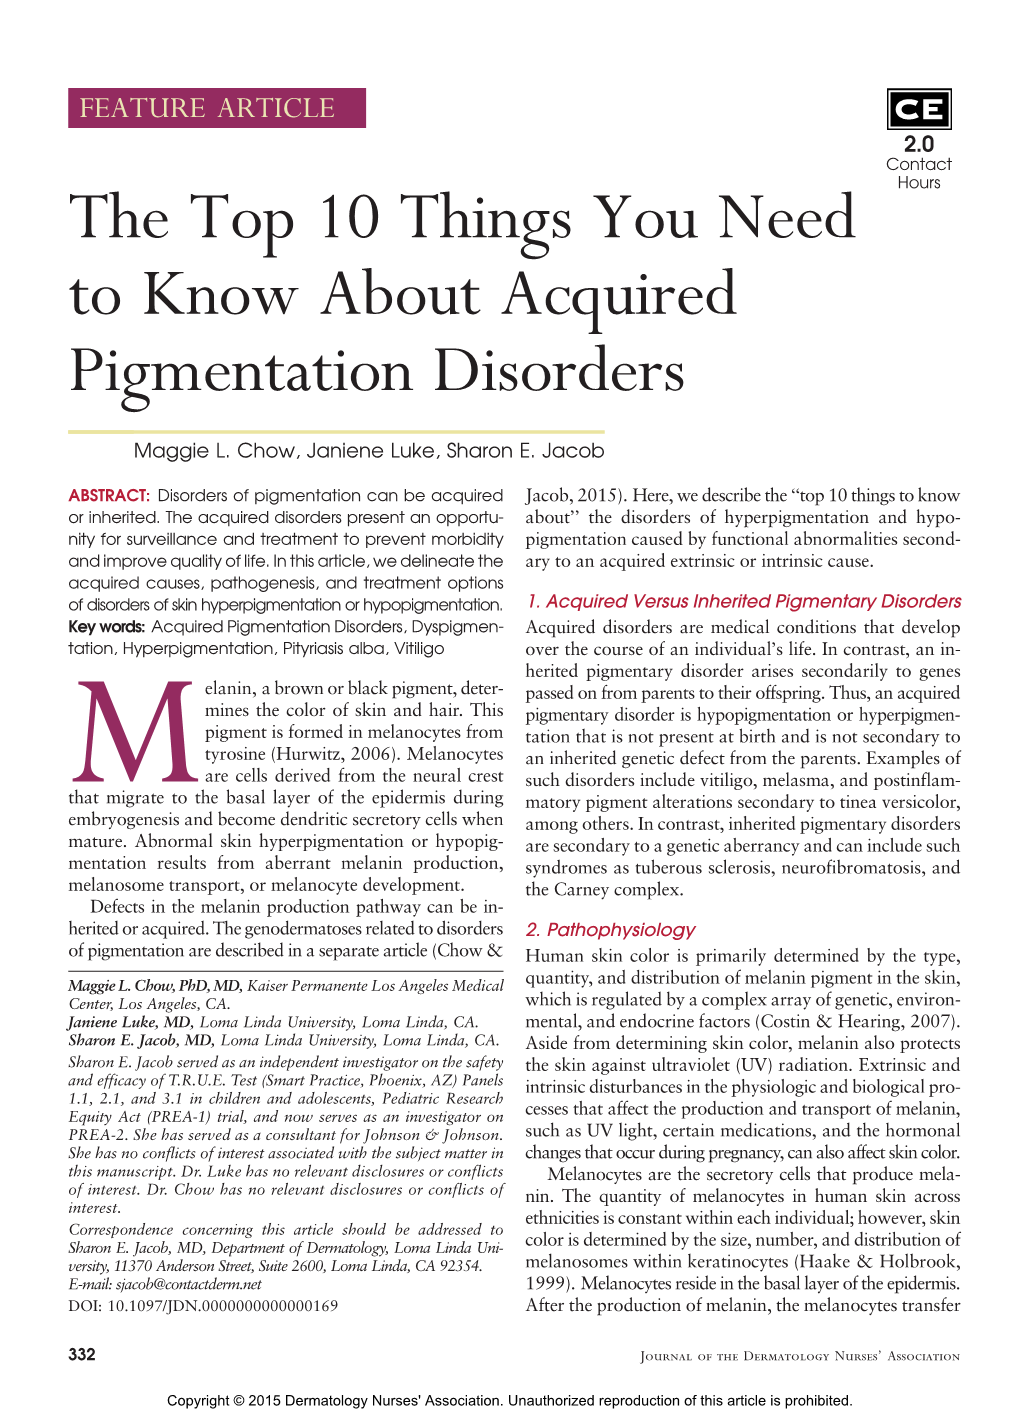 The Top 10 Things You Need to Know About Acquired Pigmentation Disorders